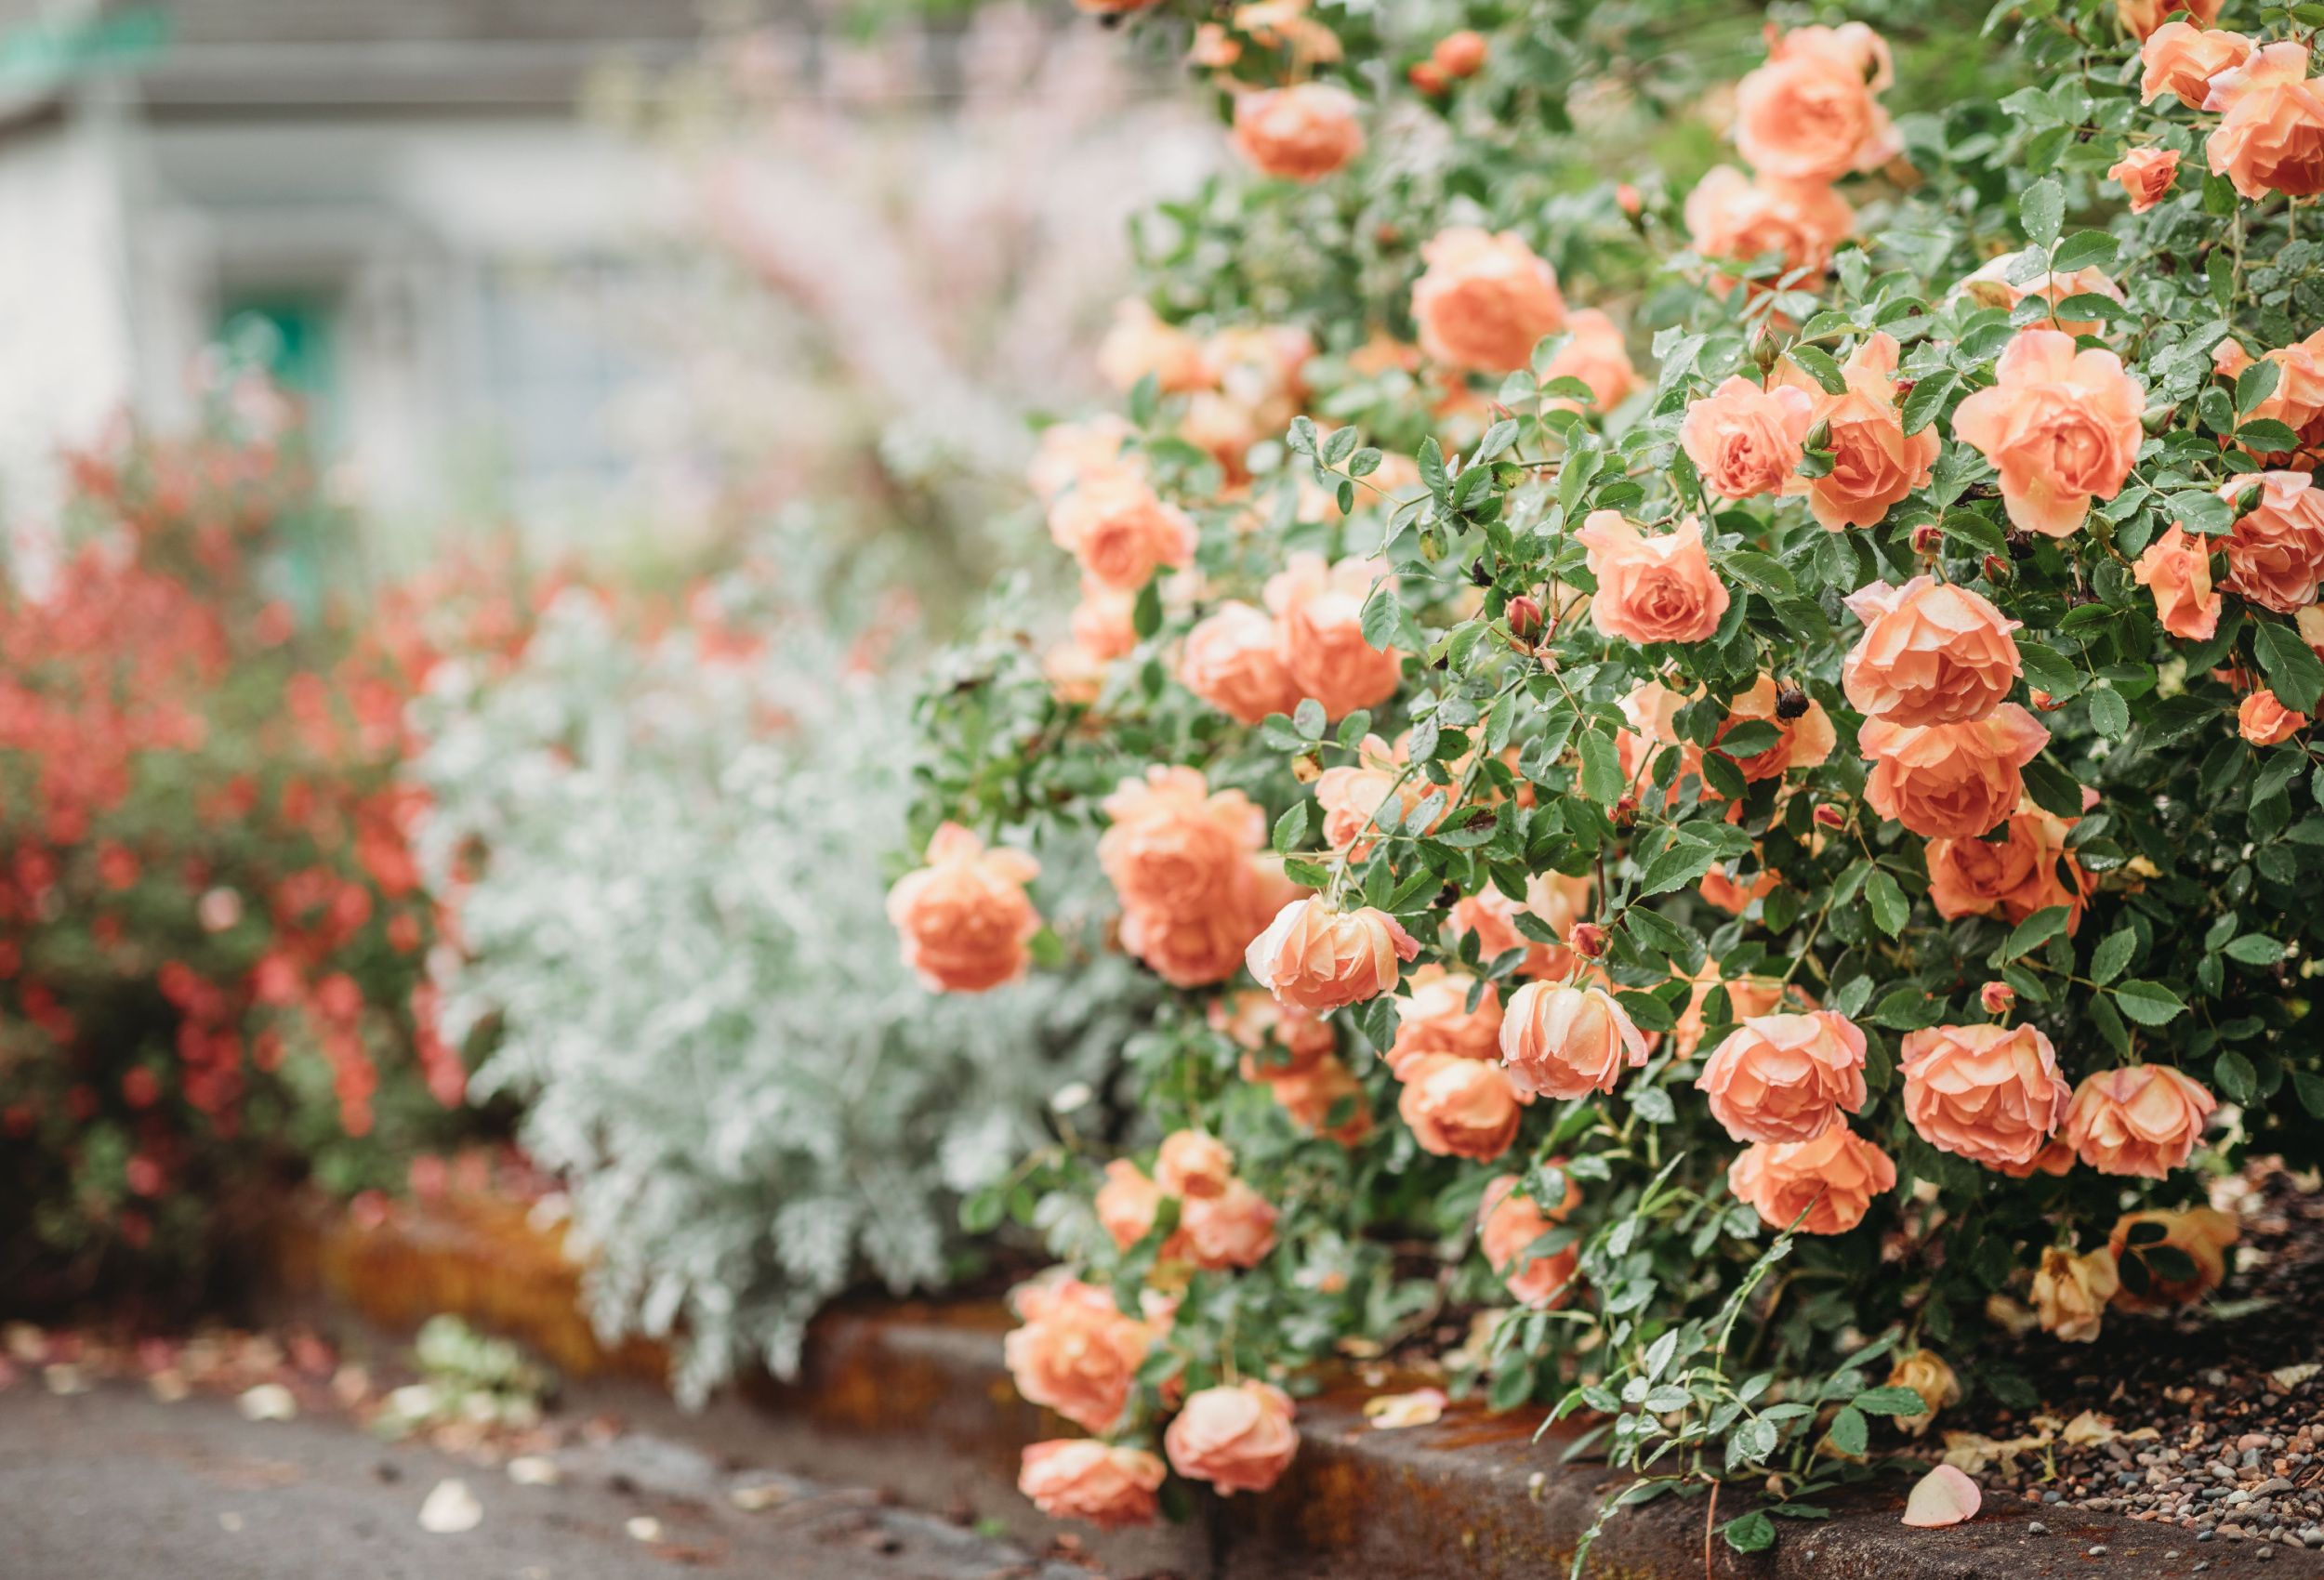 Delicate peach roses in a full bloom in the garden.